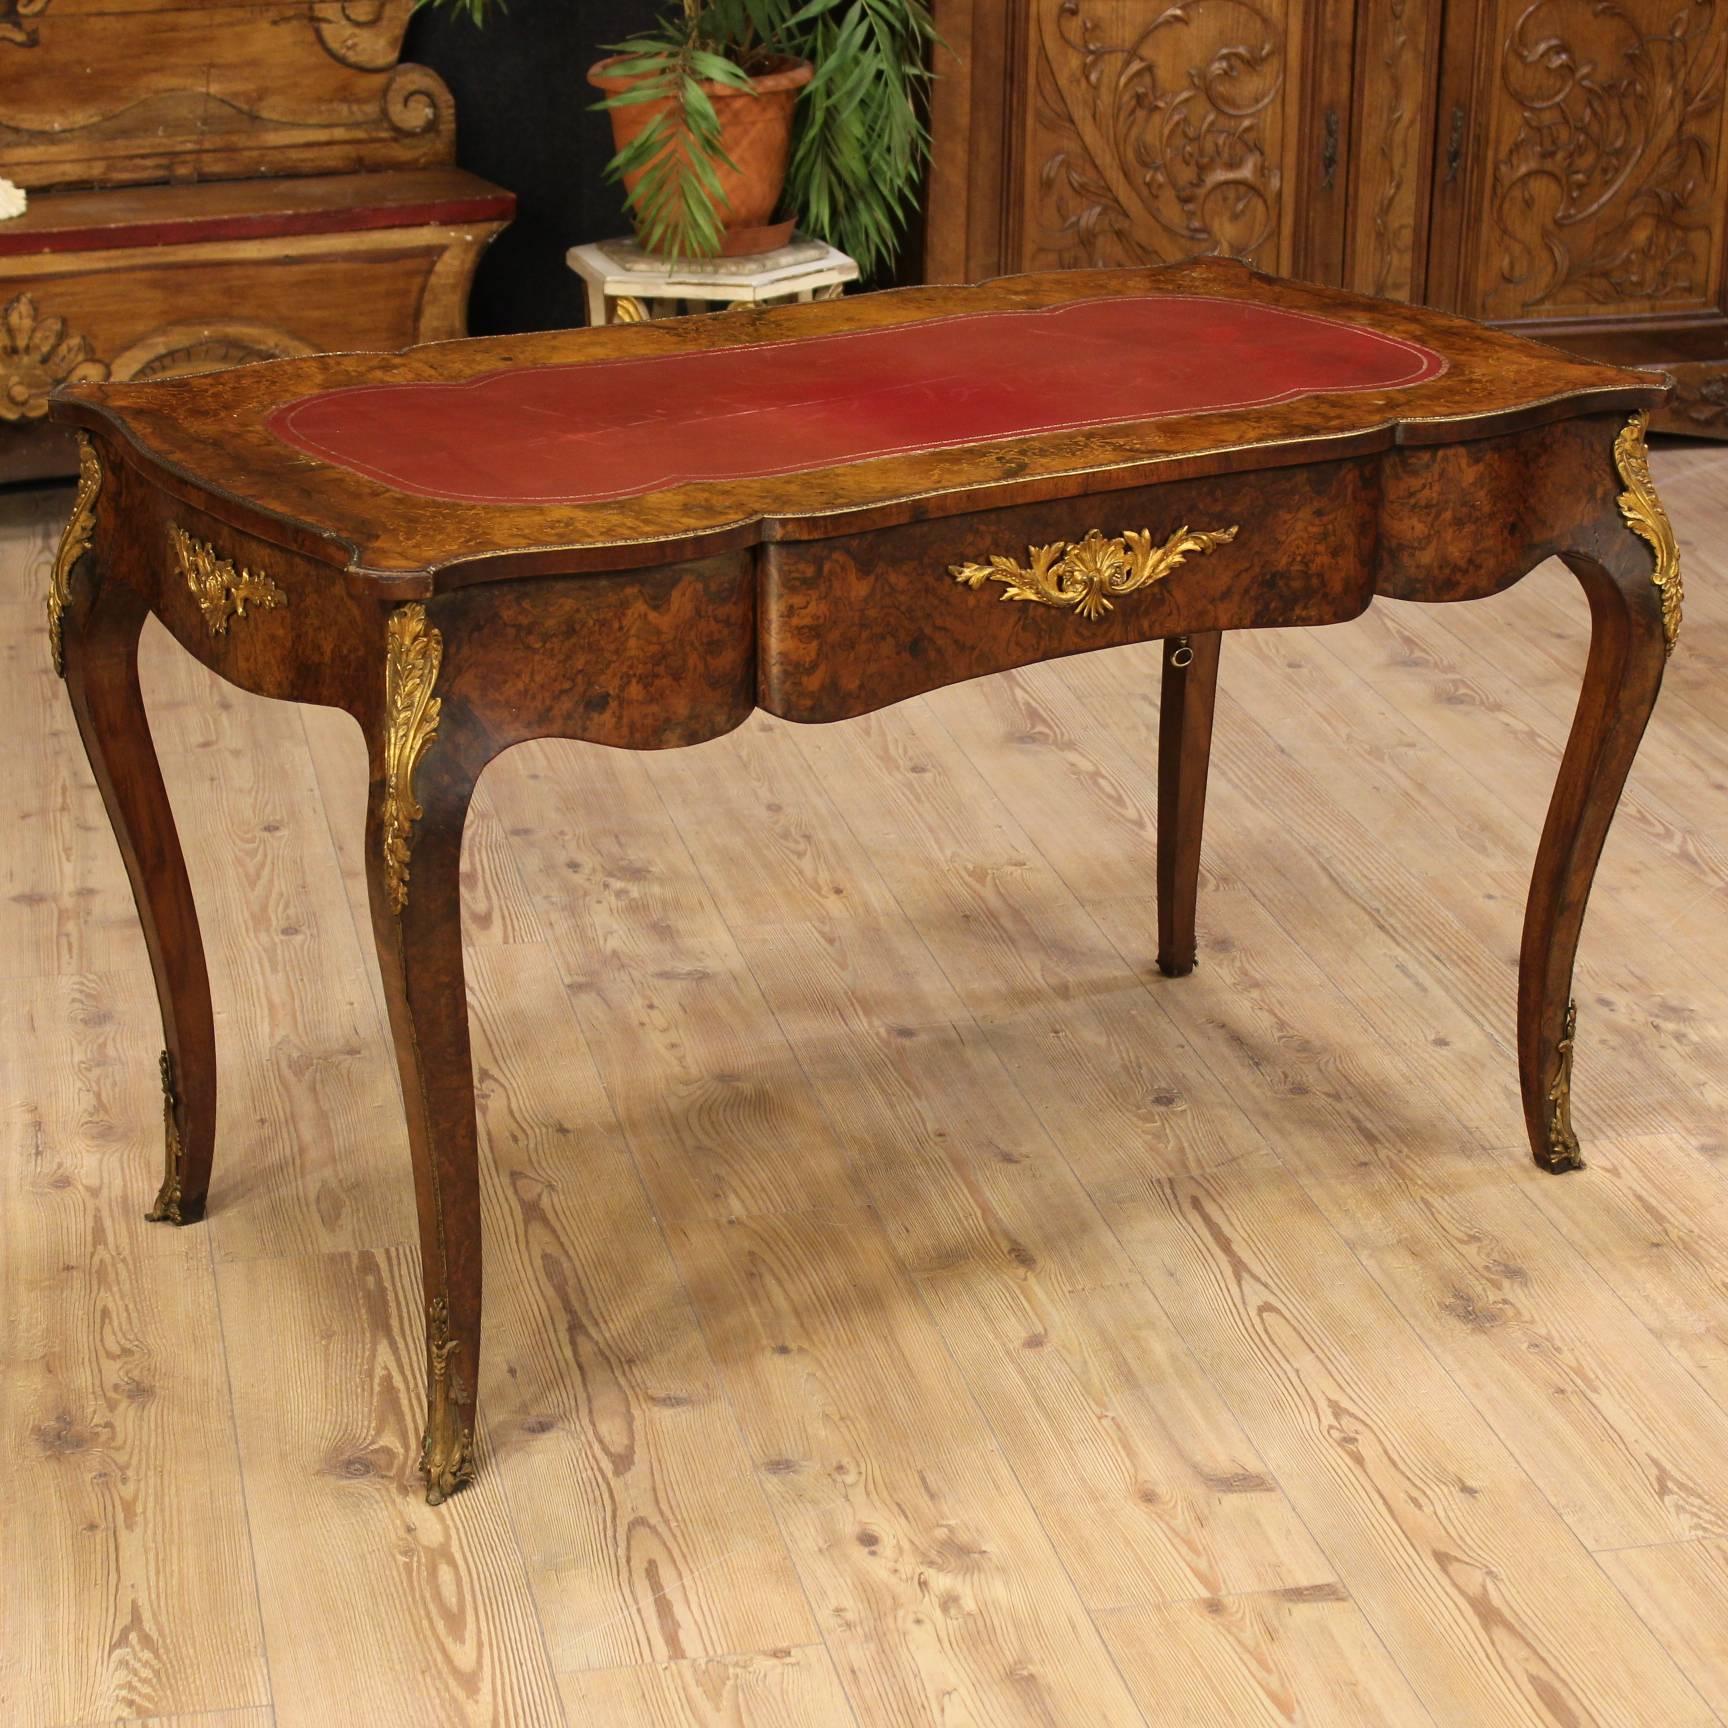 Great French writing desk from the late 19th century. Furniture from period of Napoleon III made by burl walnut with rich inlay on maple top. Desk finished from the center, richly decorated with gilded and chiseled bronze and brass. Upper top